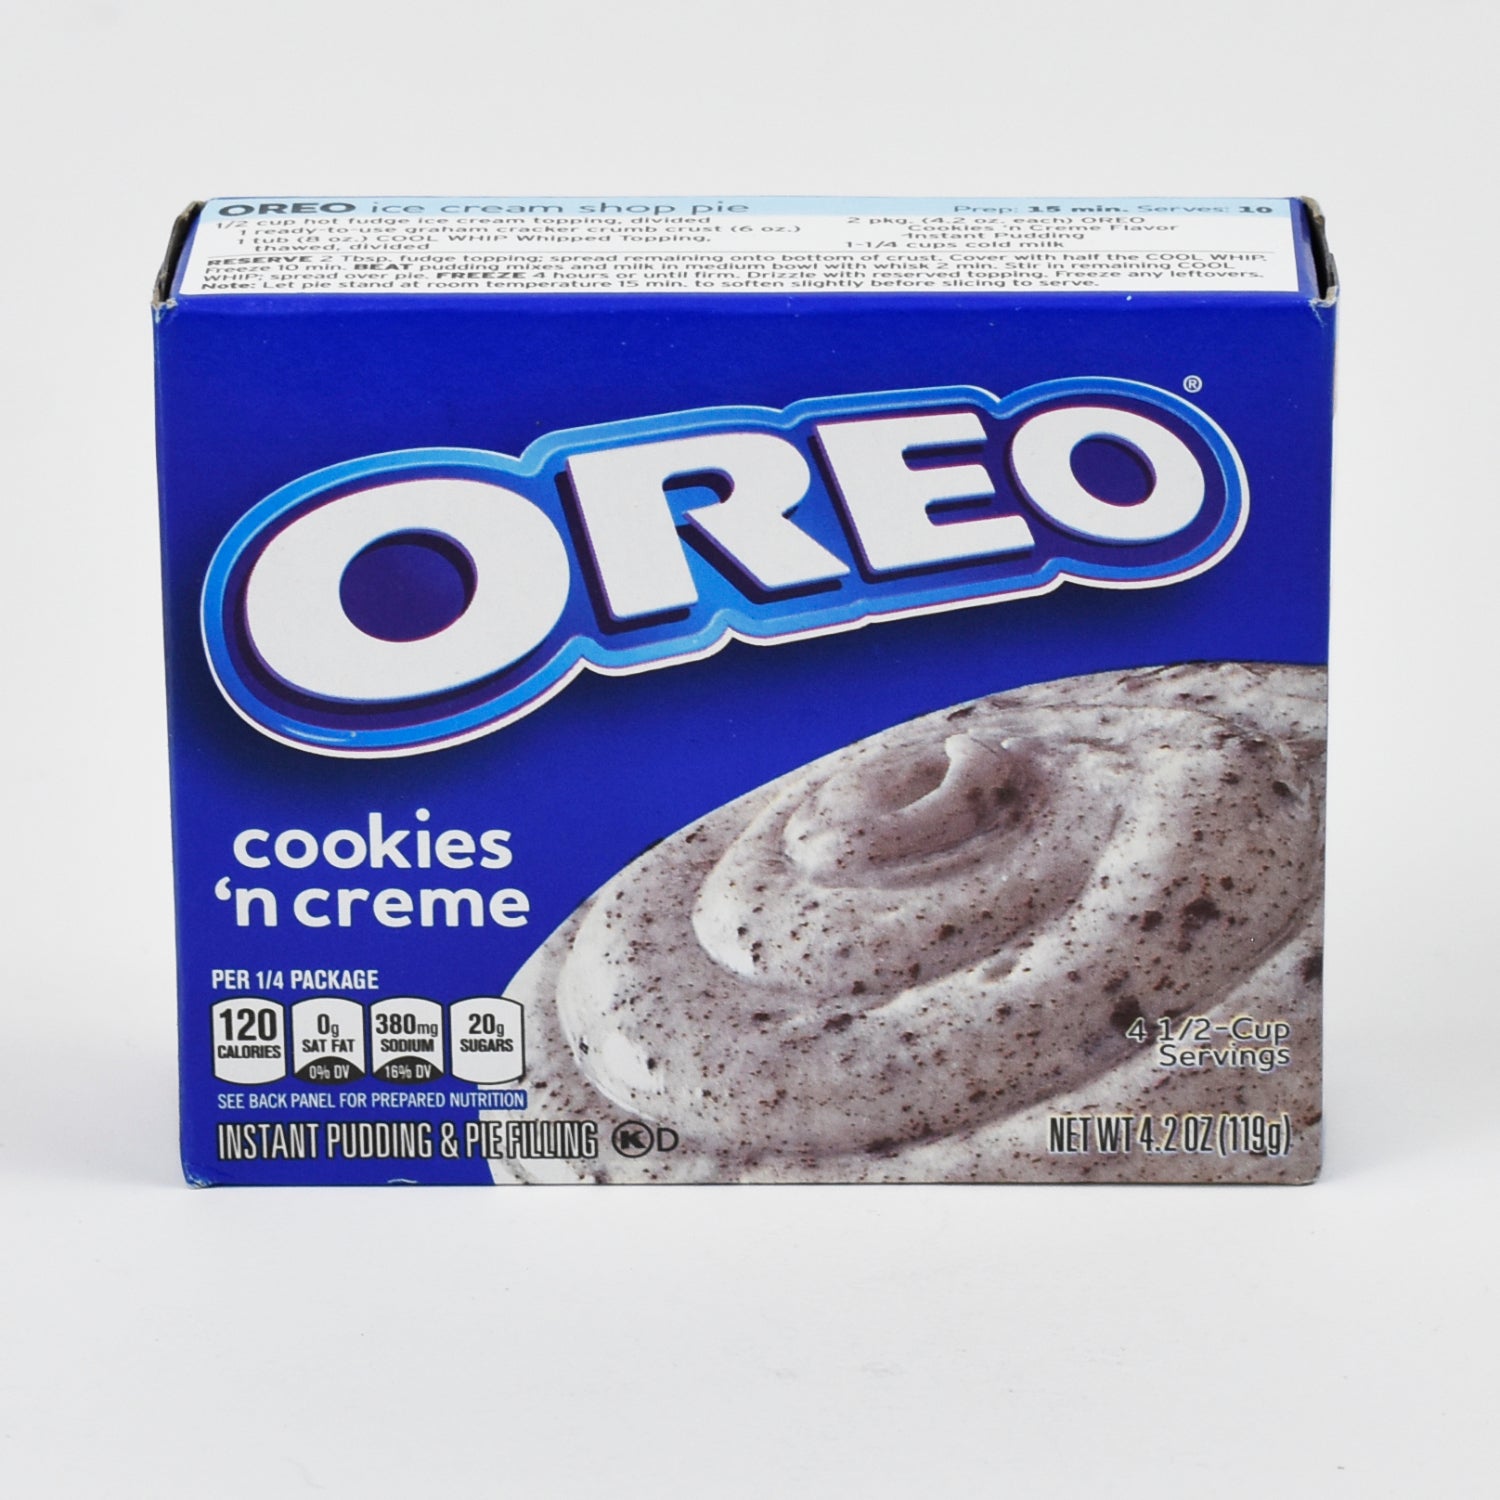 OREO COOKIES 'N CREME INSTANT PUDDING & PIE FILLING 4.2OZ (119G)